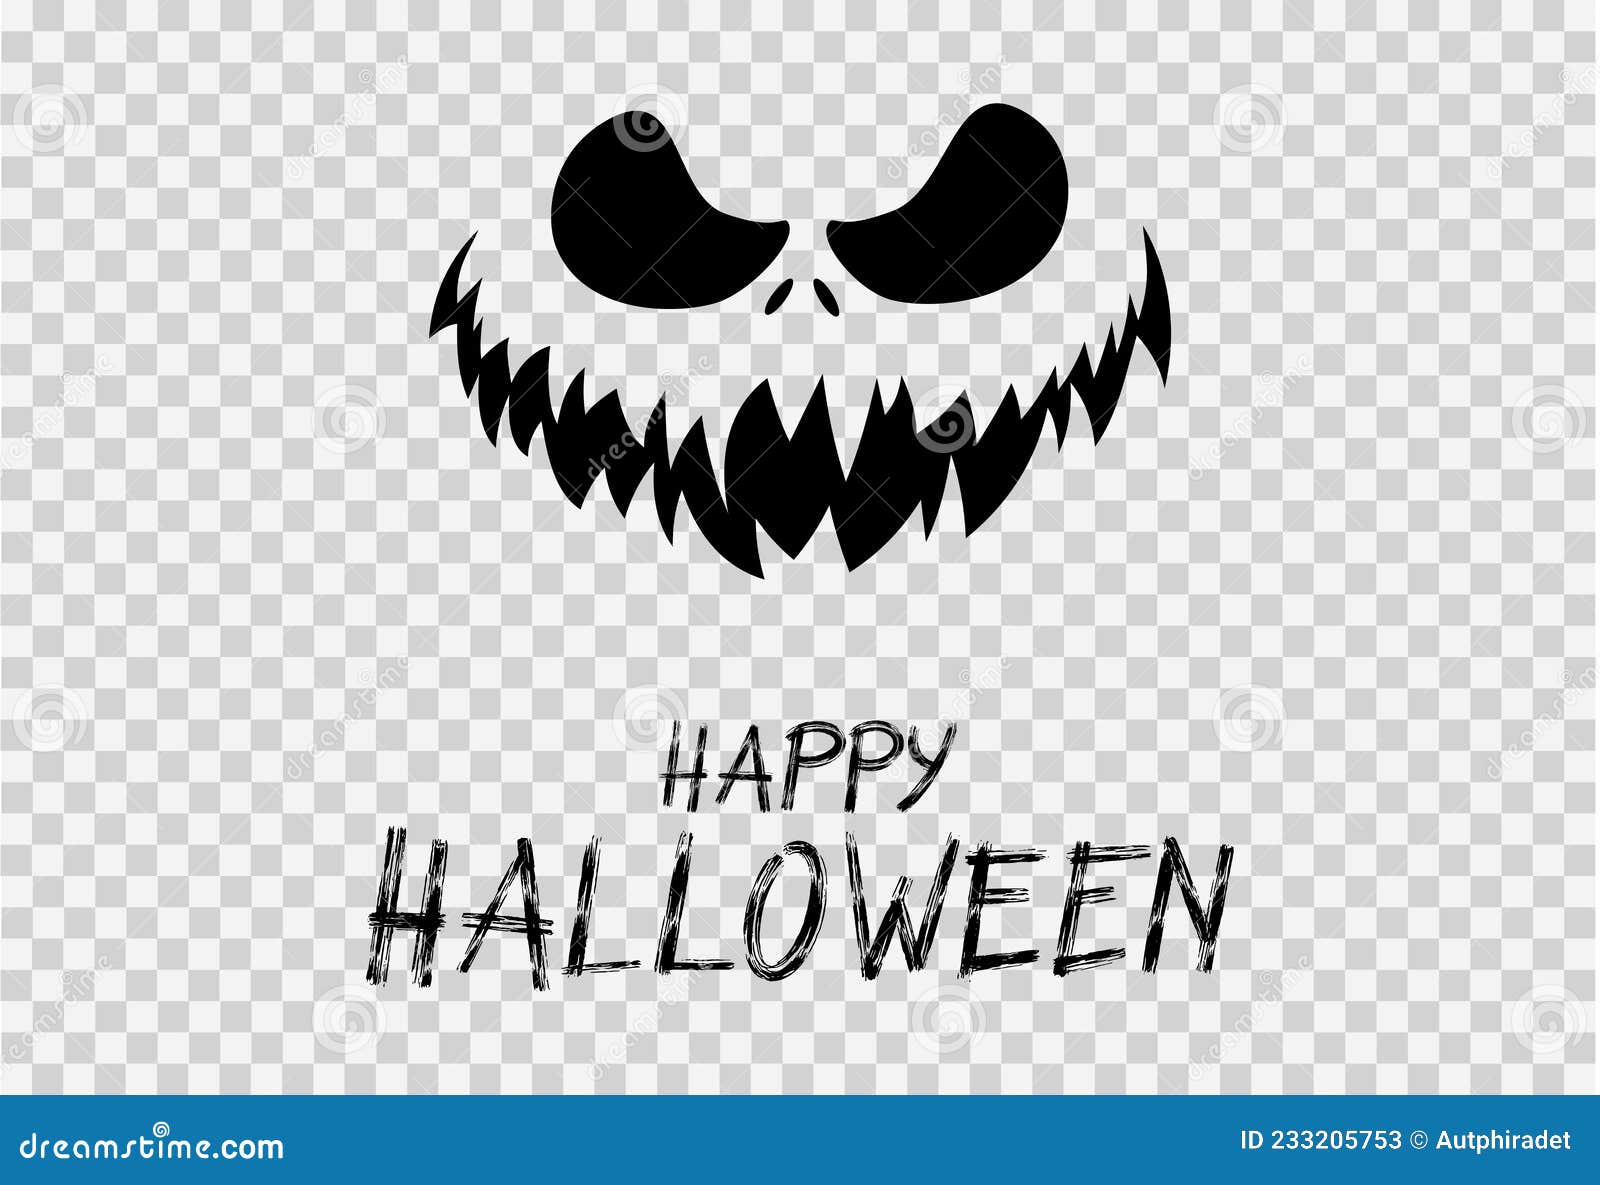 Scary pumpkin face on transparent background PNG - Similar PNG